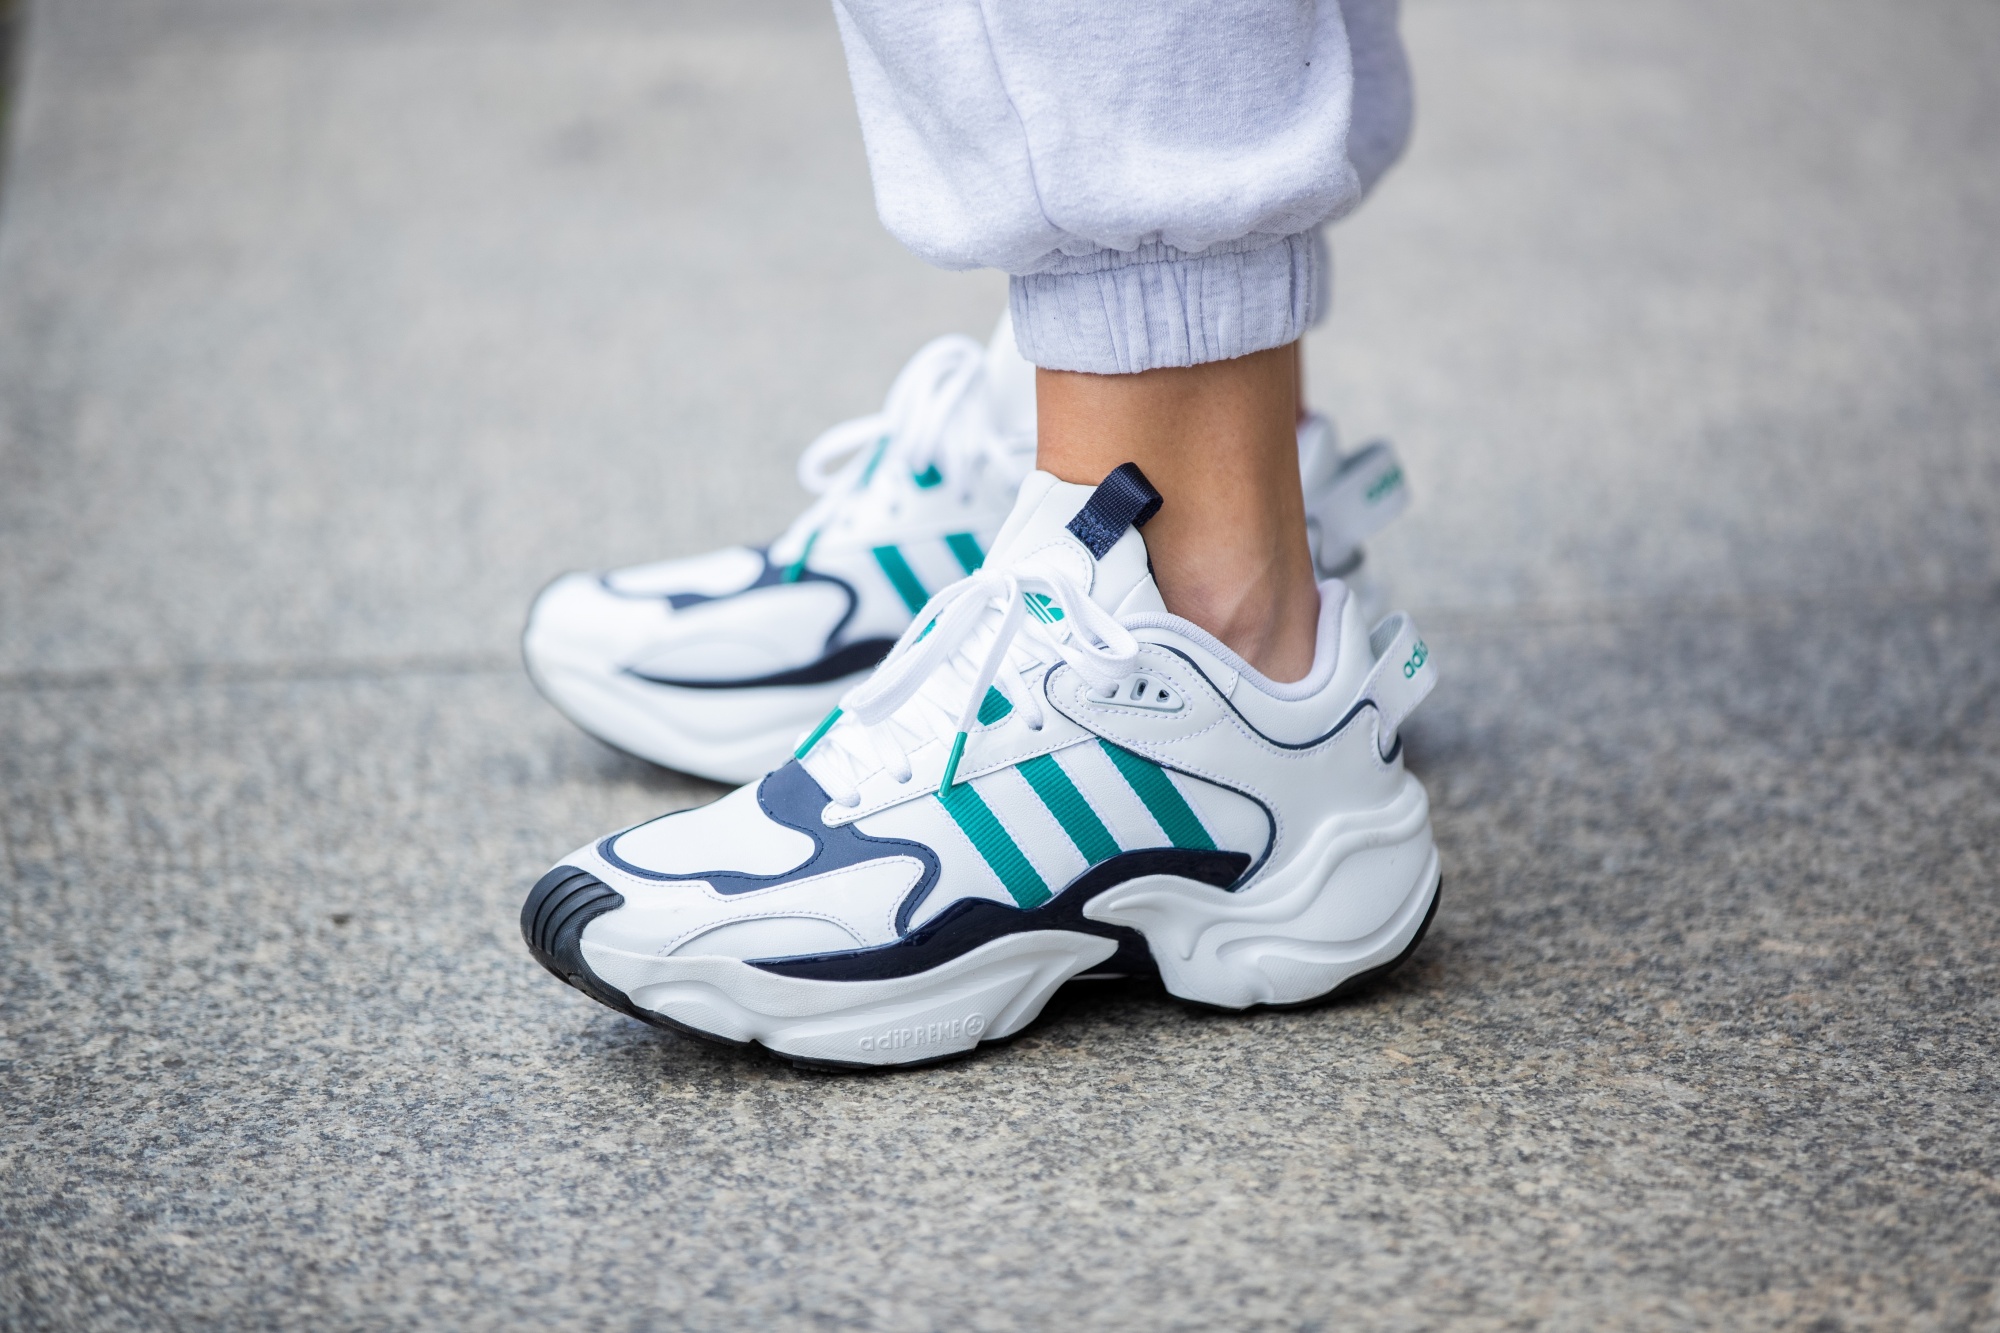 adidas pull string shoes